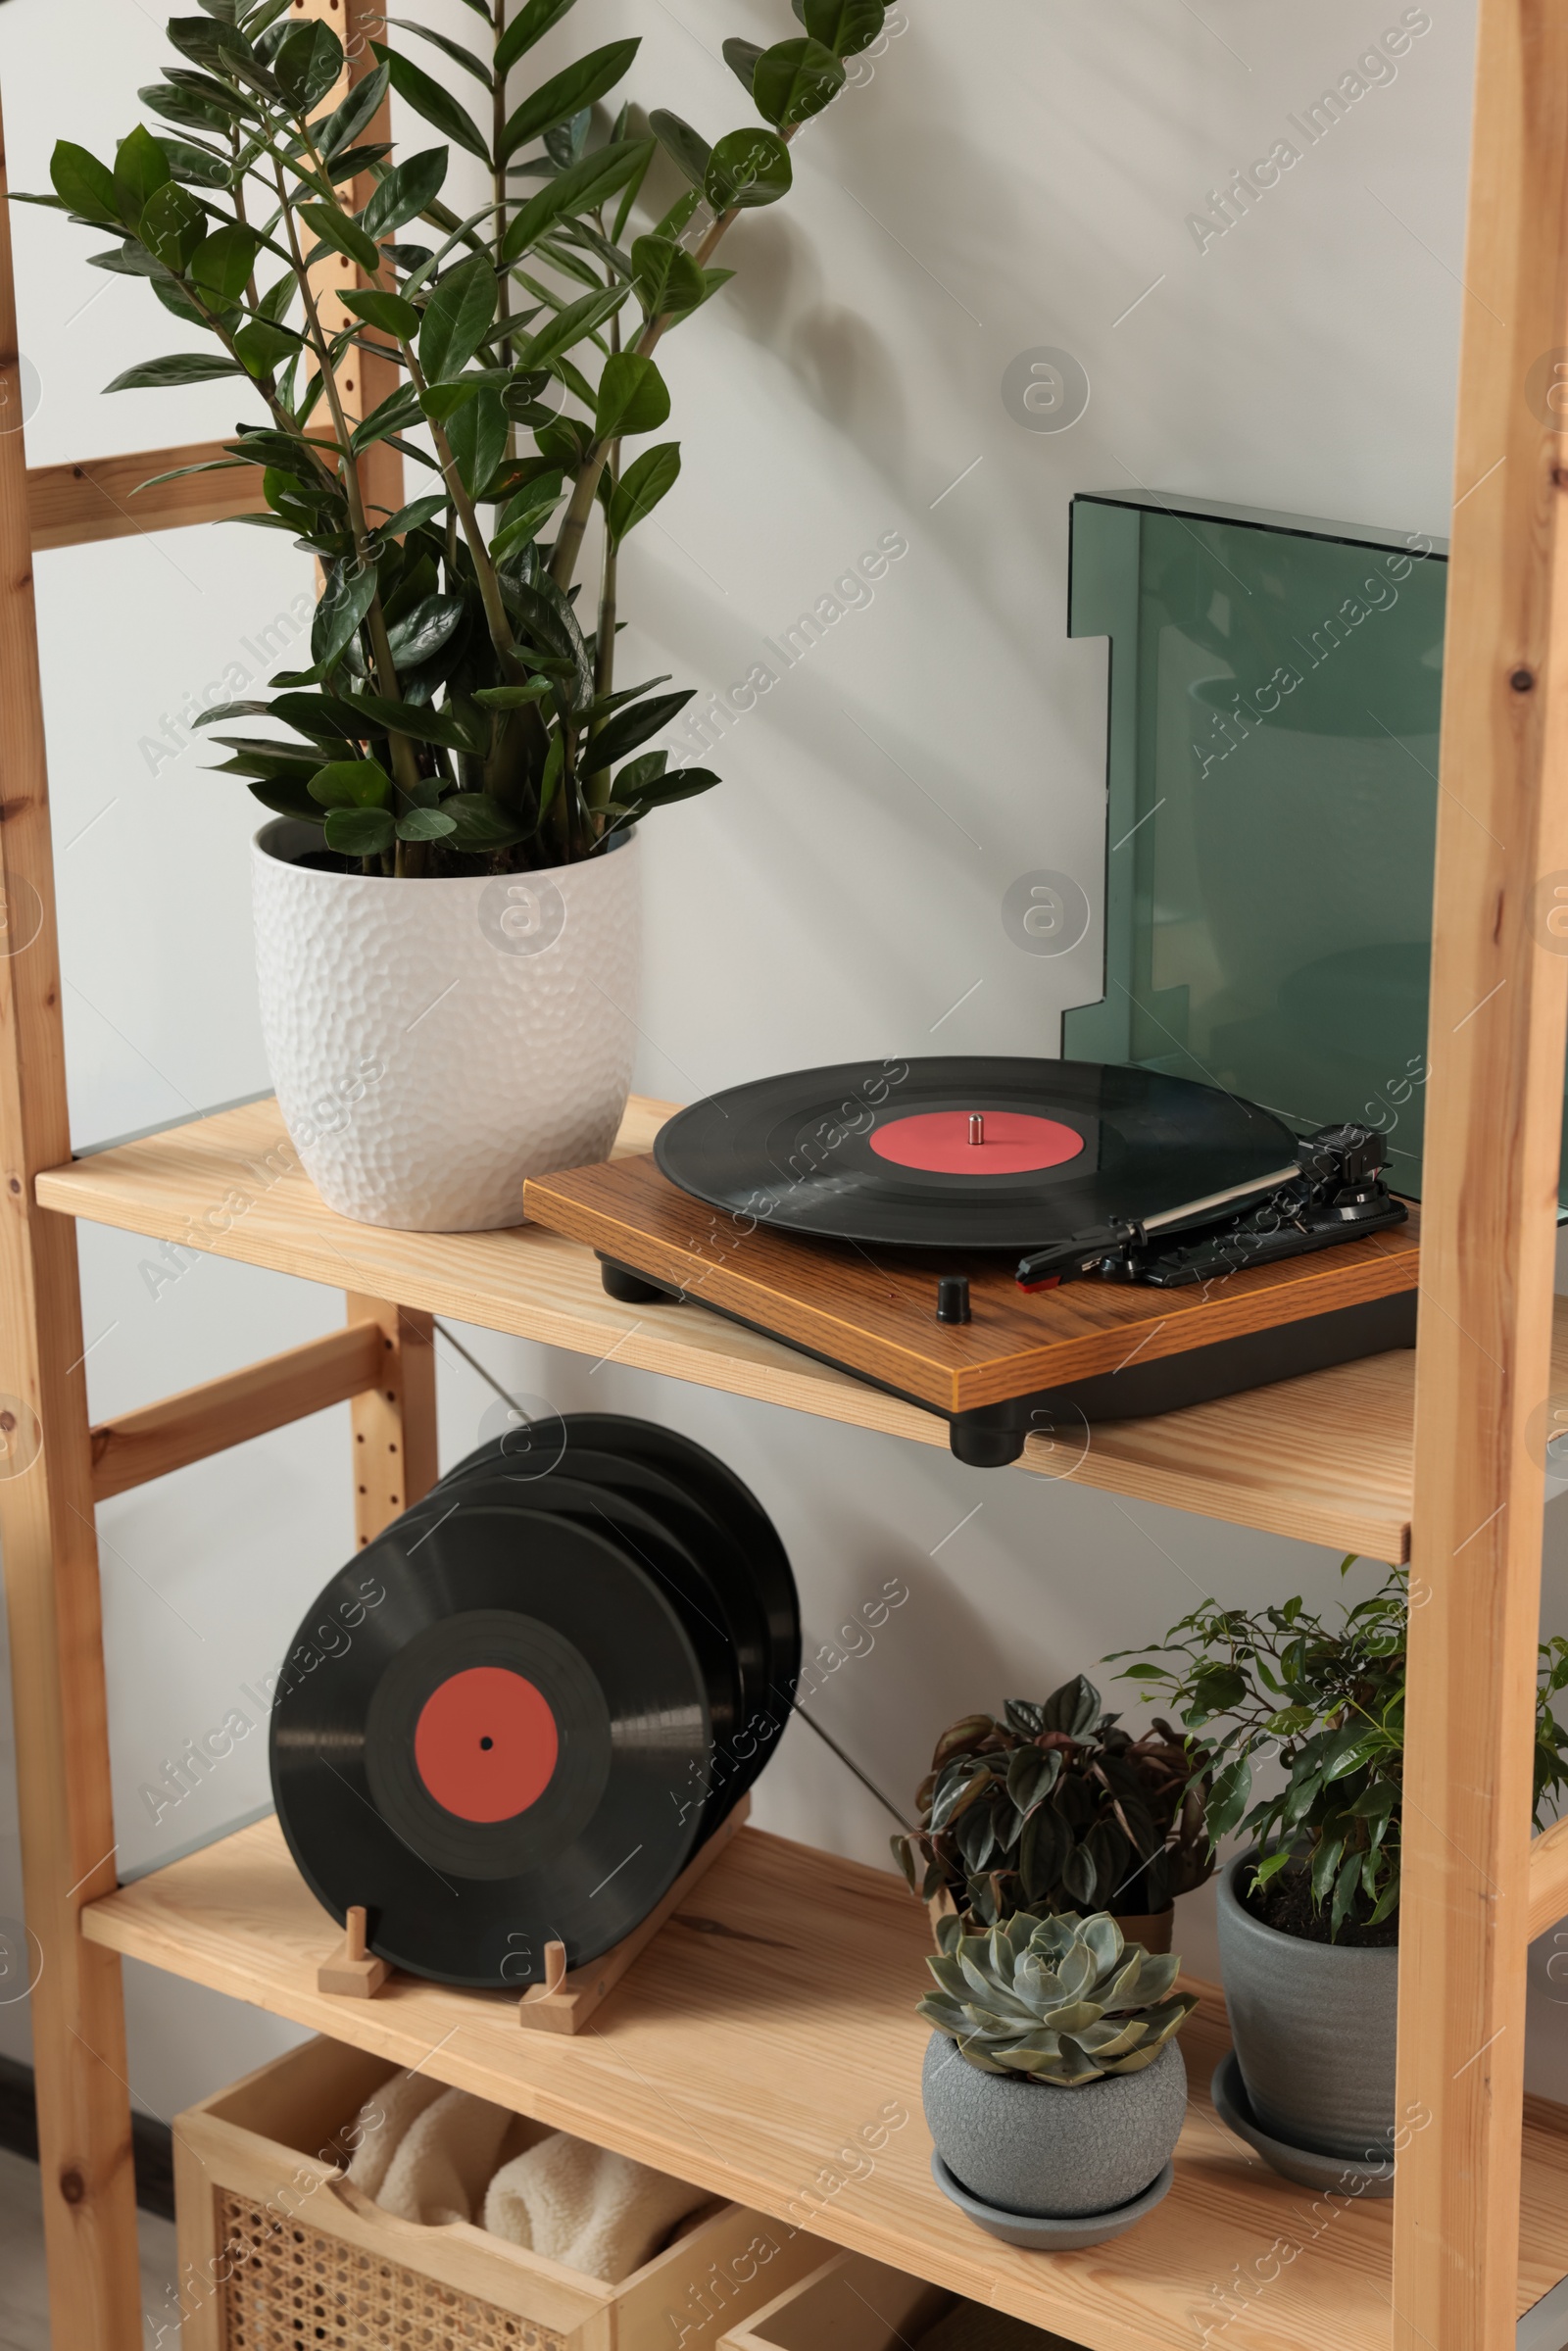 Photo of Vinyl records with stylish turntable and houseplants on wooden shelving unit in room